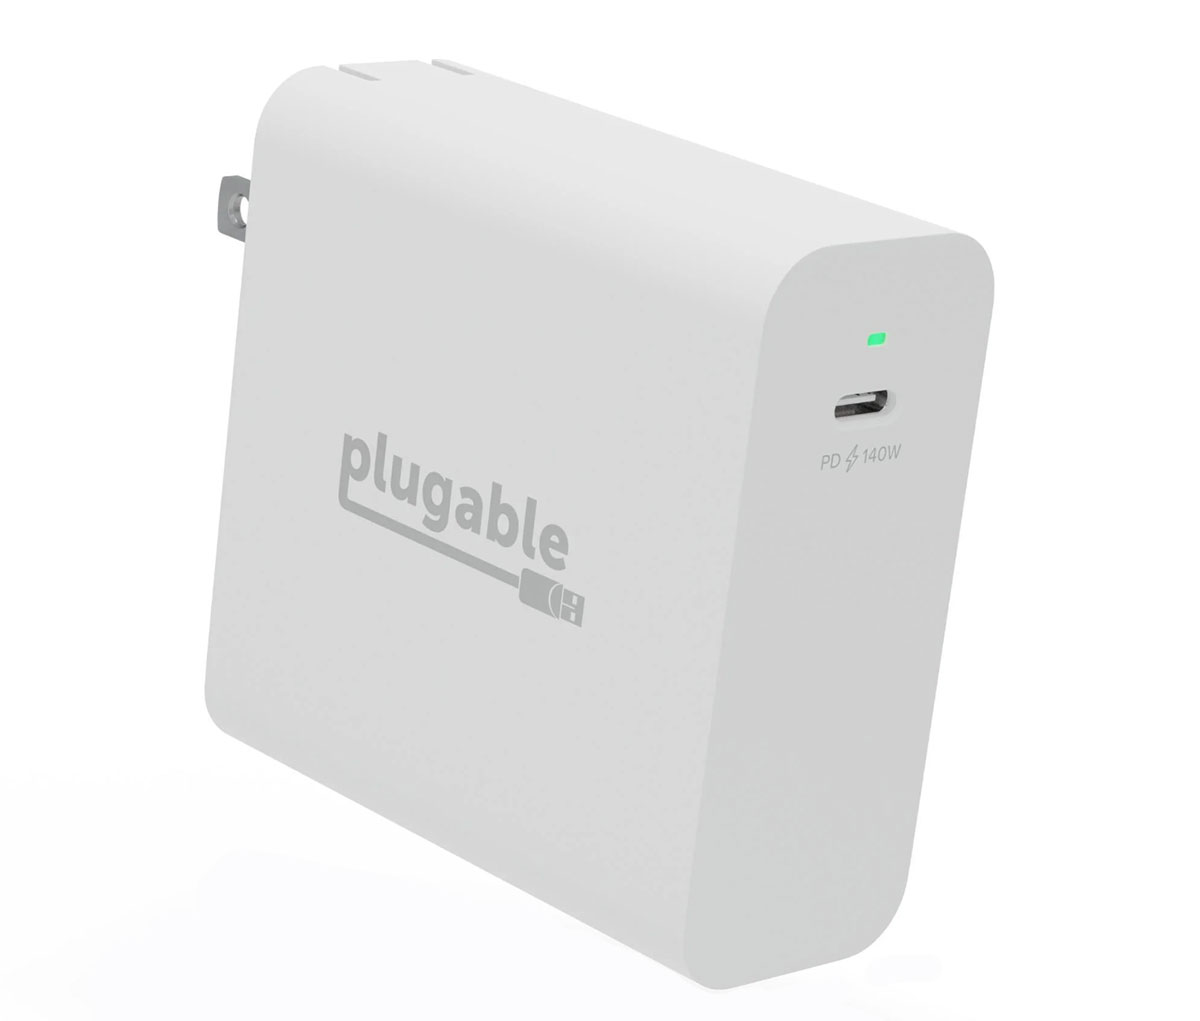 Plugable 140W USB-C Power Adapter – Best budget one-port wall charger for 16in MacBook Pro